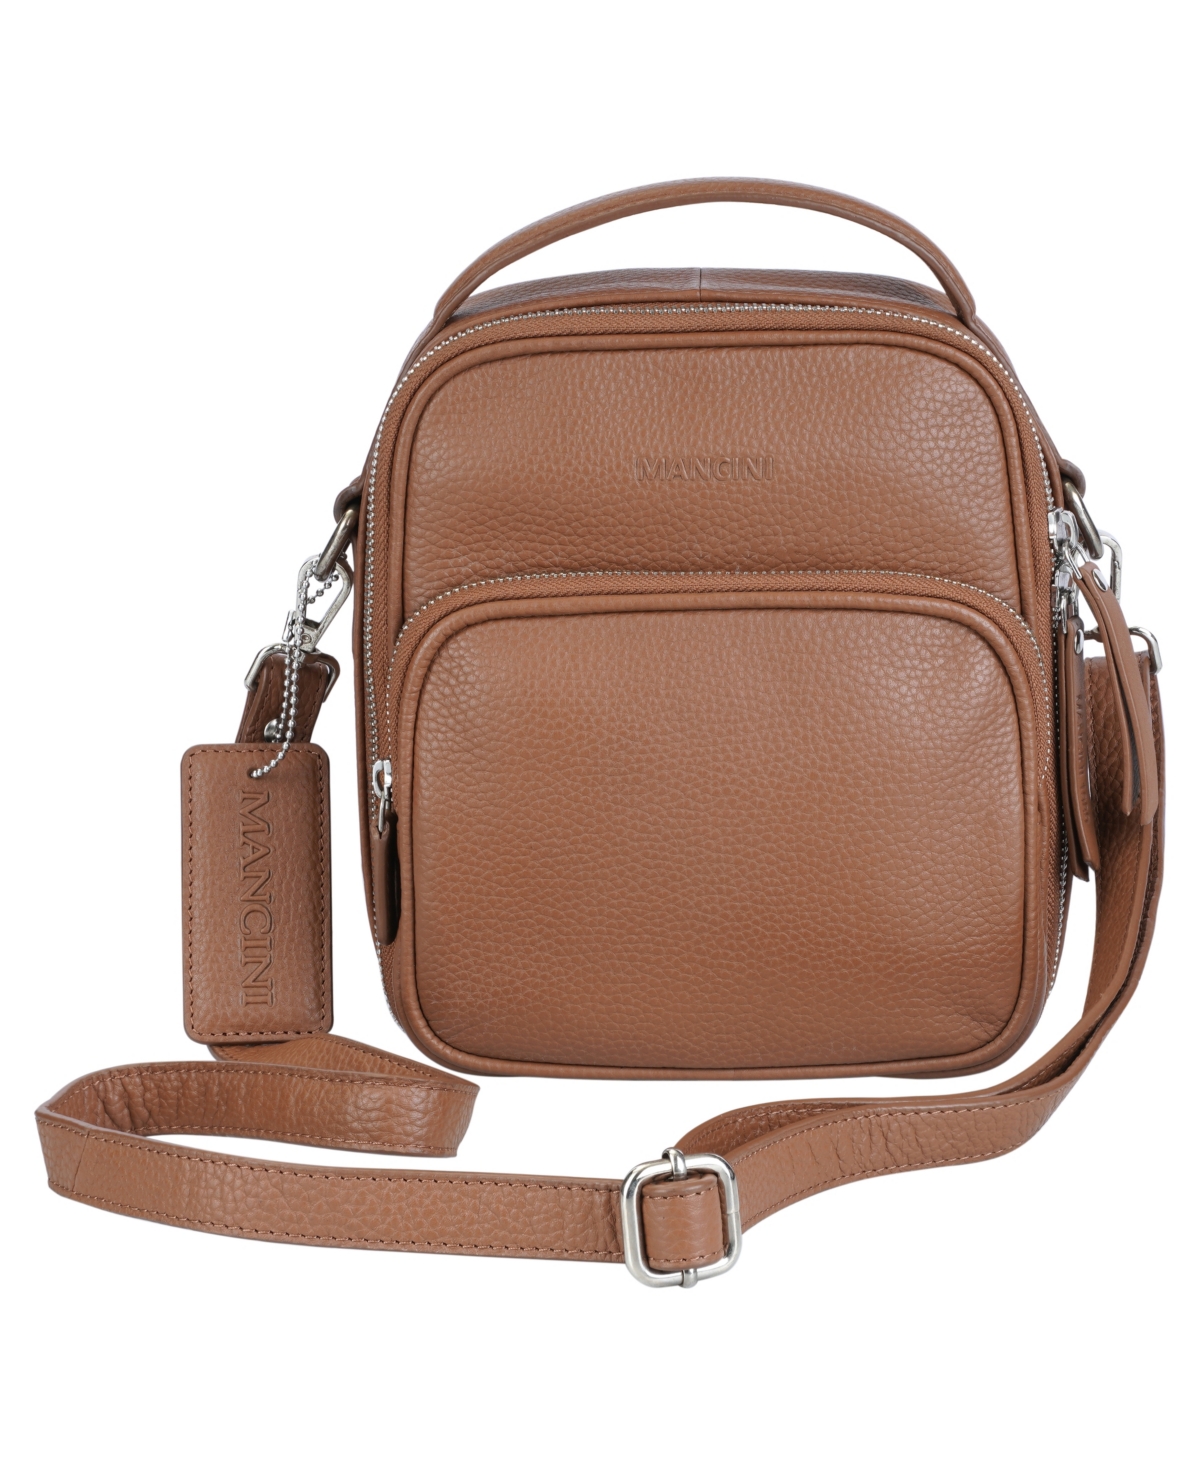 Mancini Pebbled Collection Daisy North-south Leather Crossbody Bag In Camel